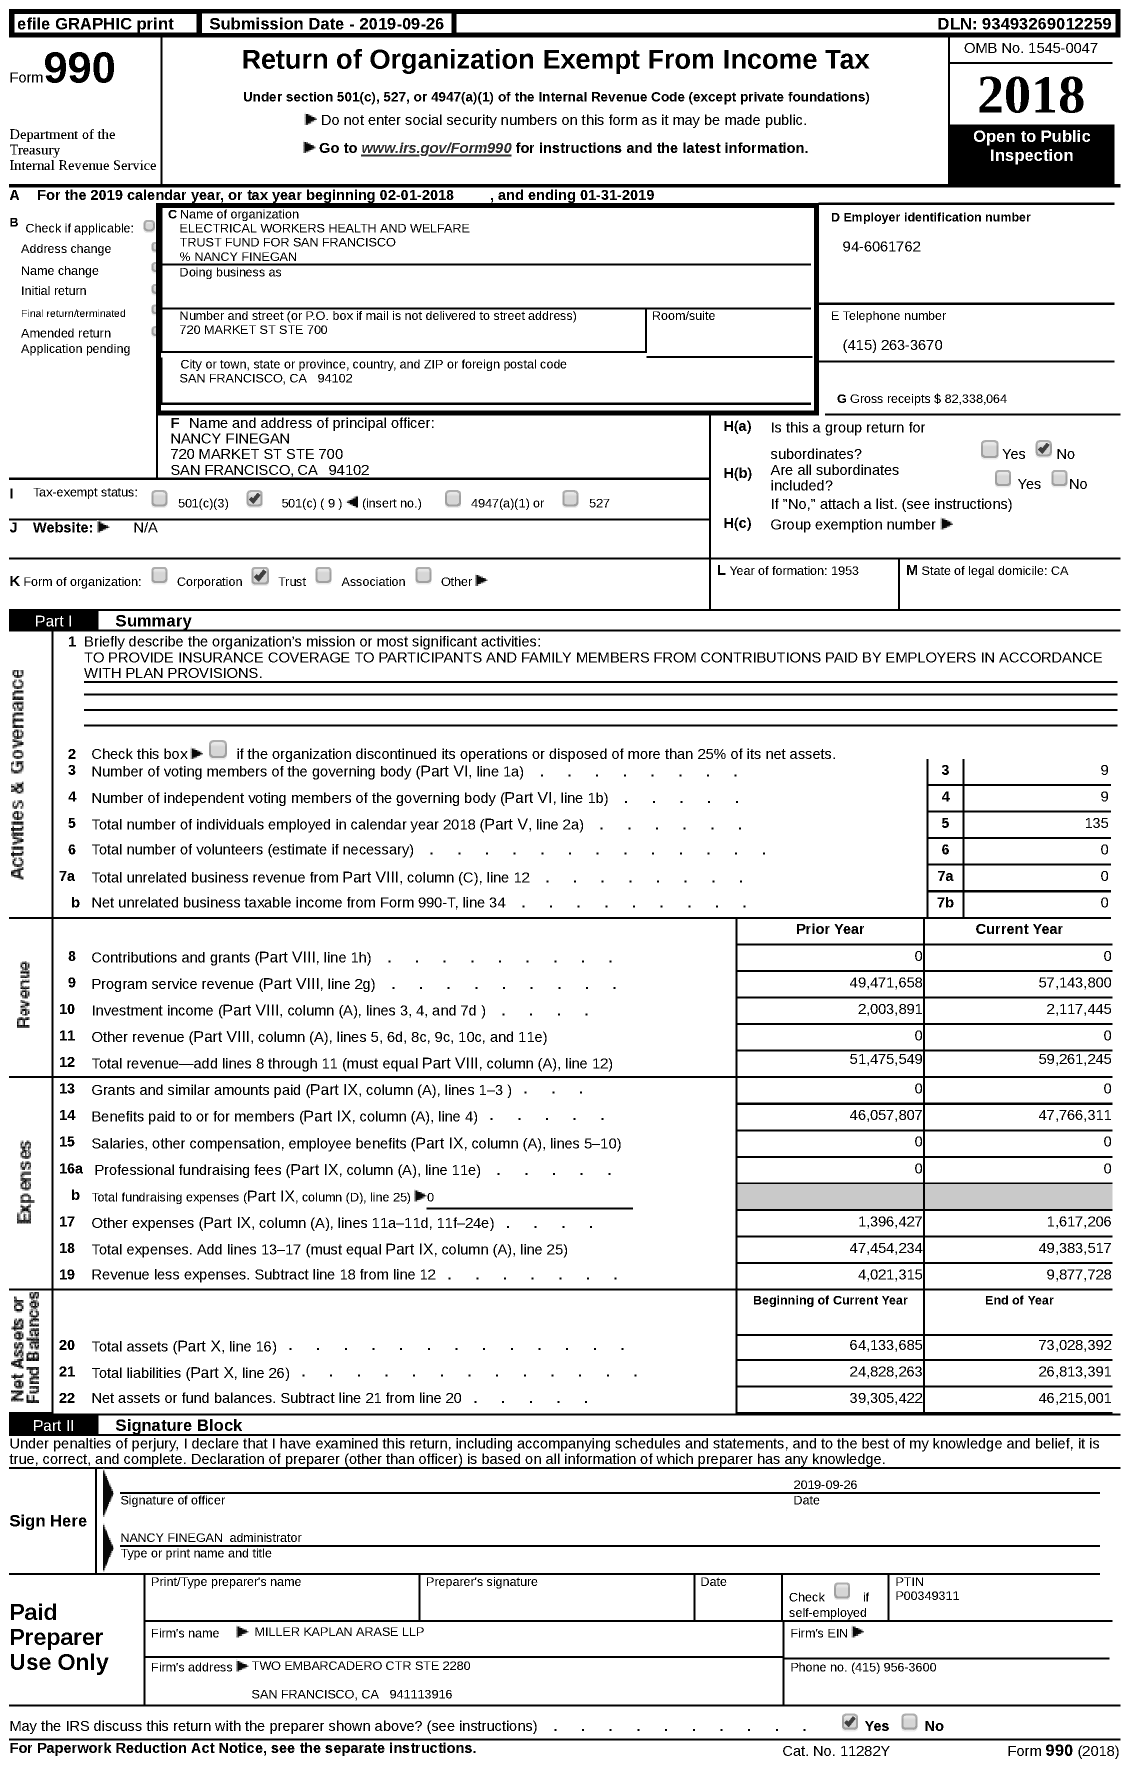 Image of first page of 2018 Form 990 for Electrical Workers Health and Welfare Trust Fund for San Francisco